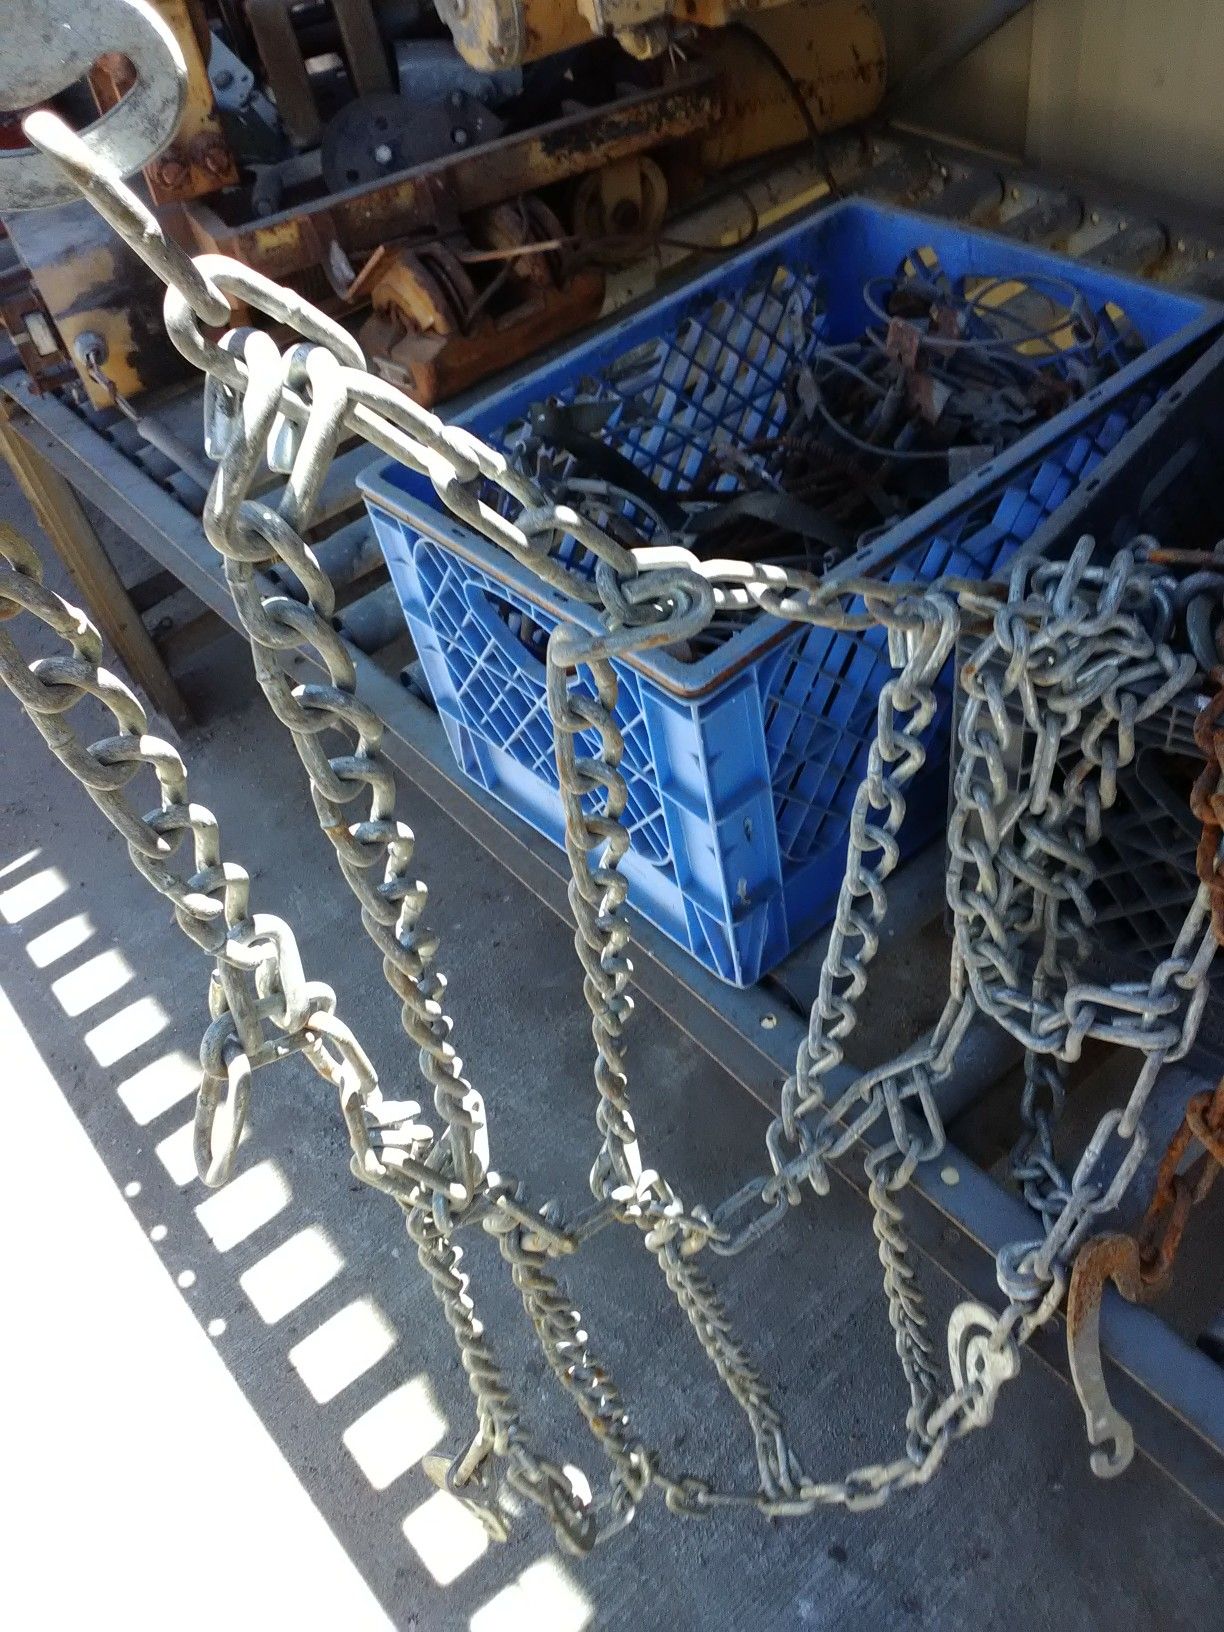 Big tractor tire chains